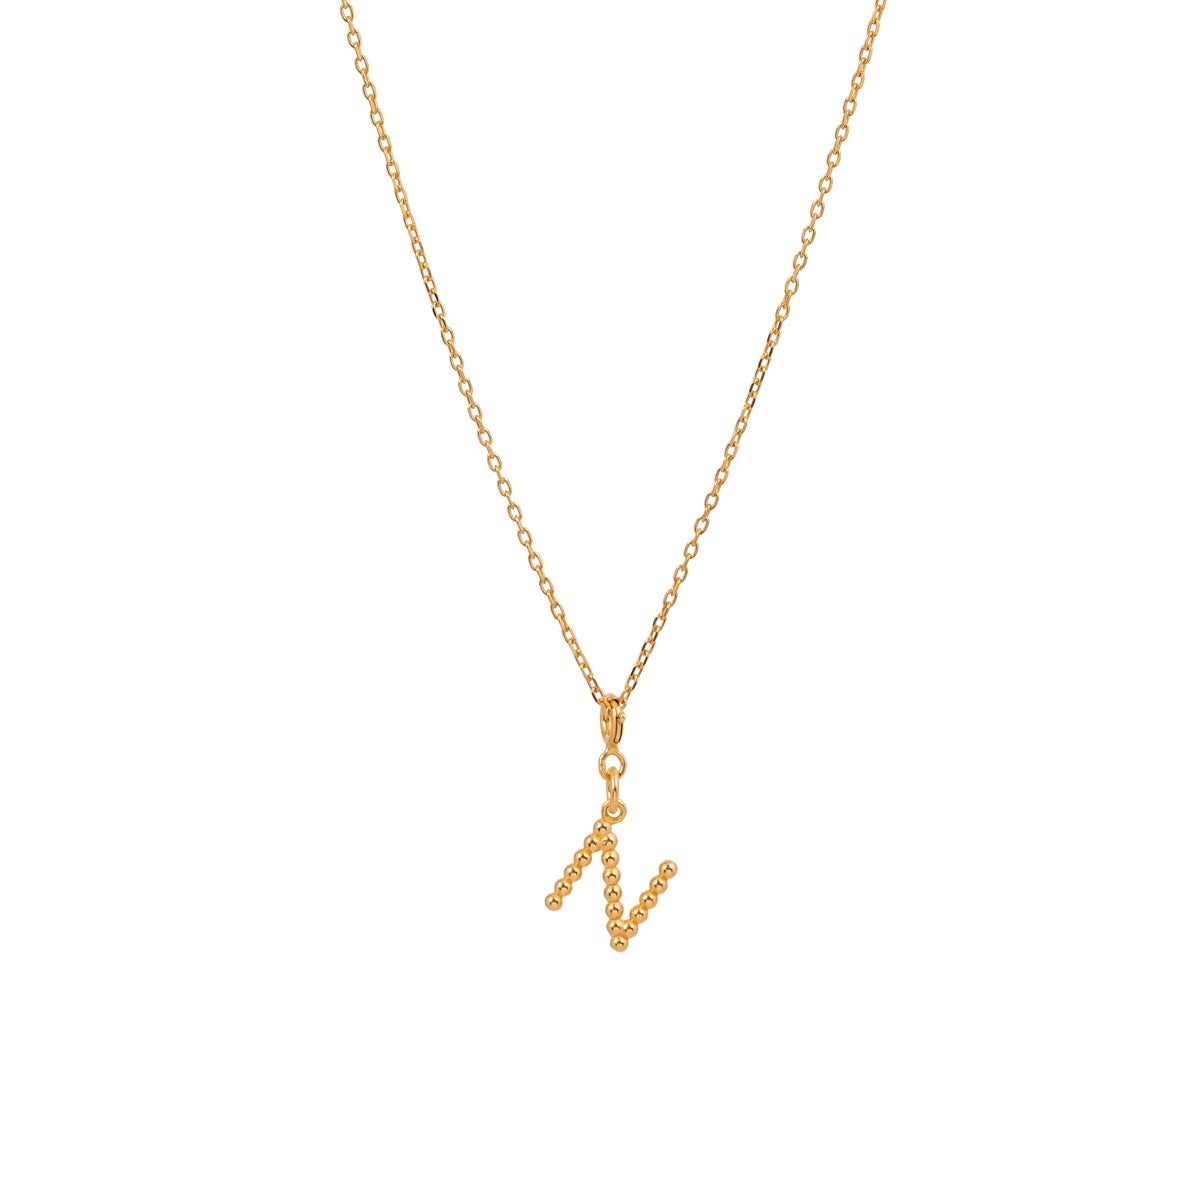 Yllätys Monogram Necklace N, gold-plated silver